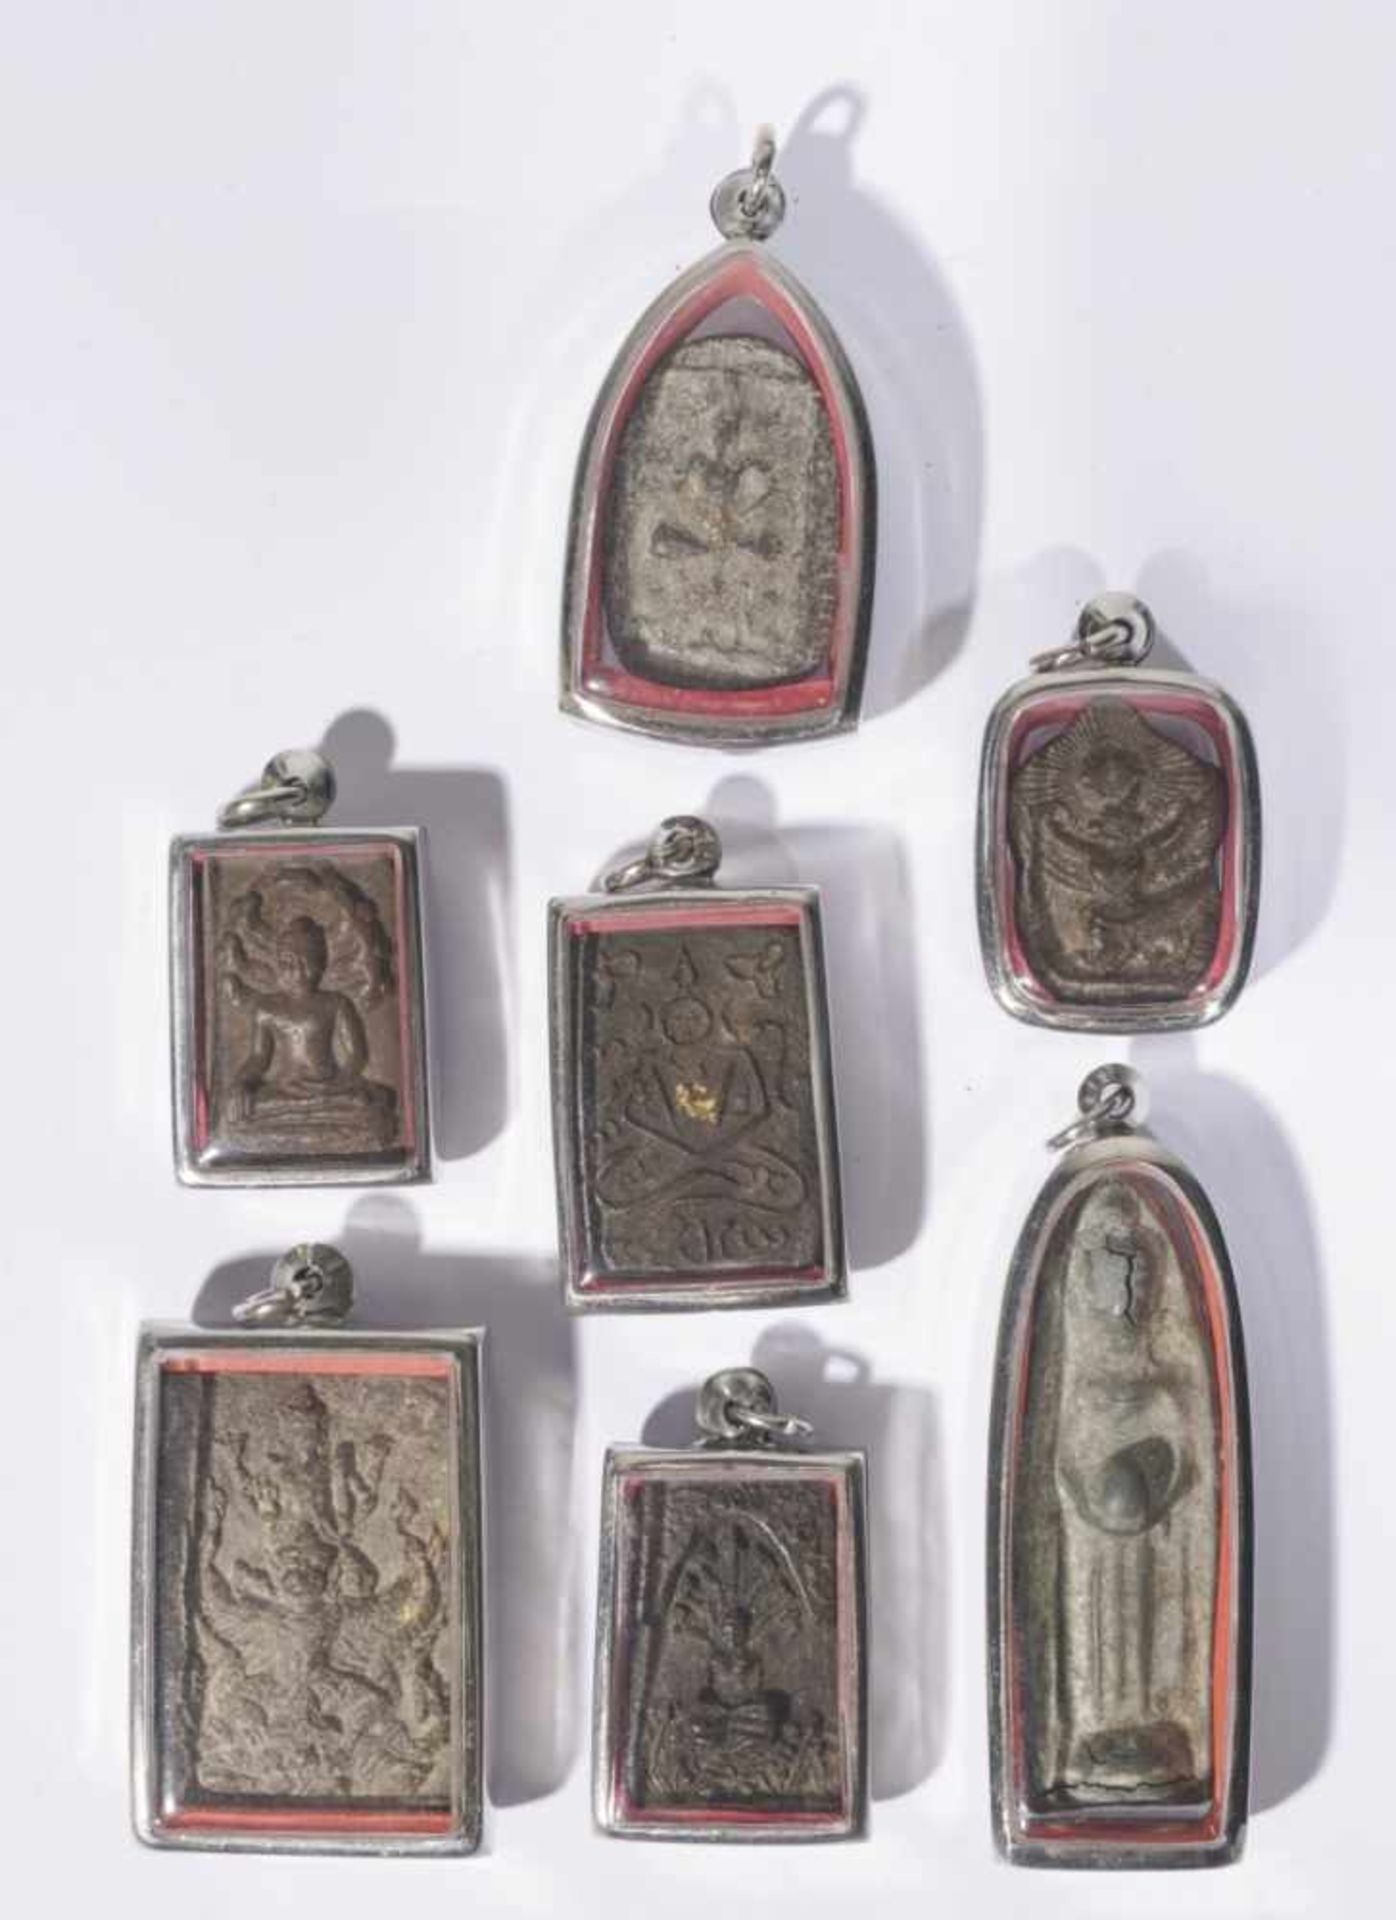 Seven antique buddhist amulet pendants, each set in a modern pendant under glass, from 3